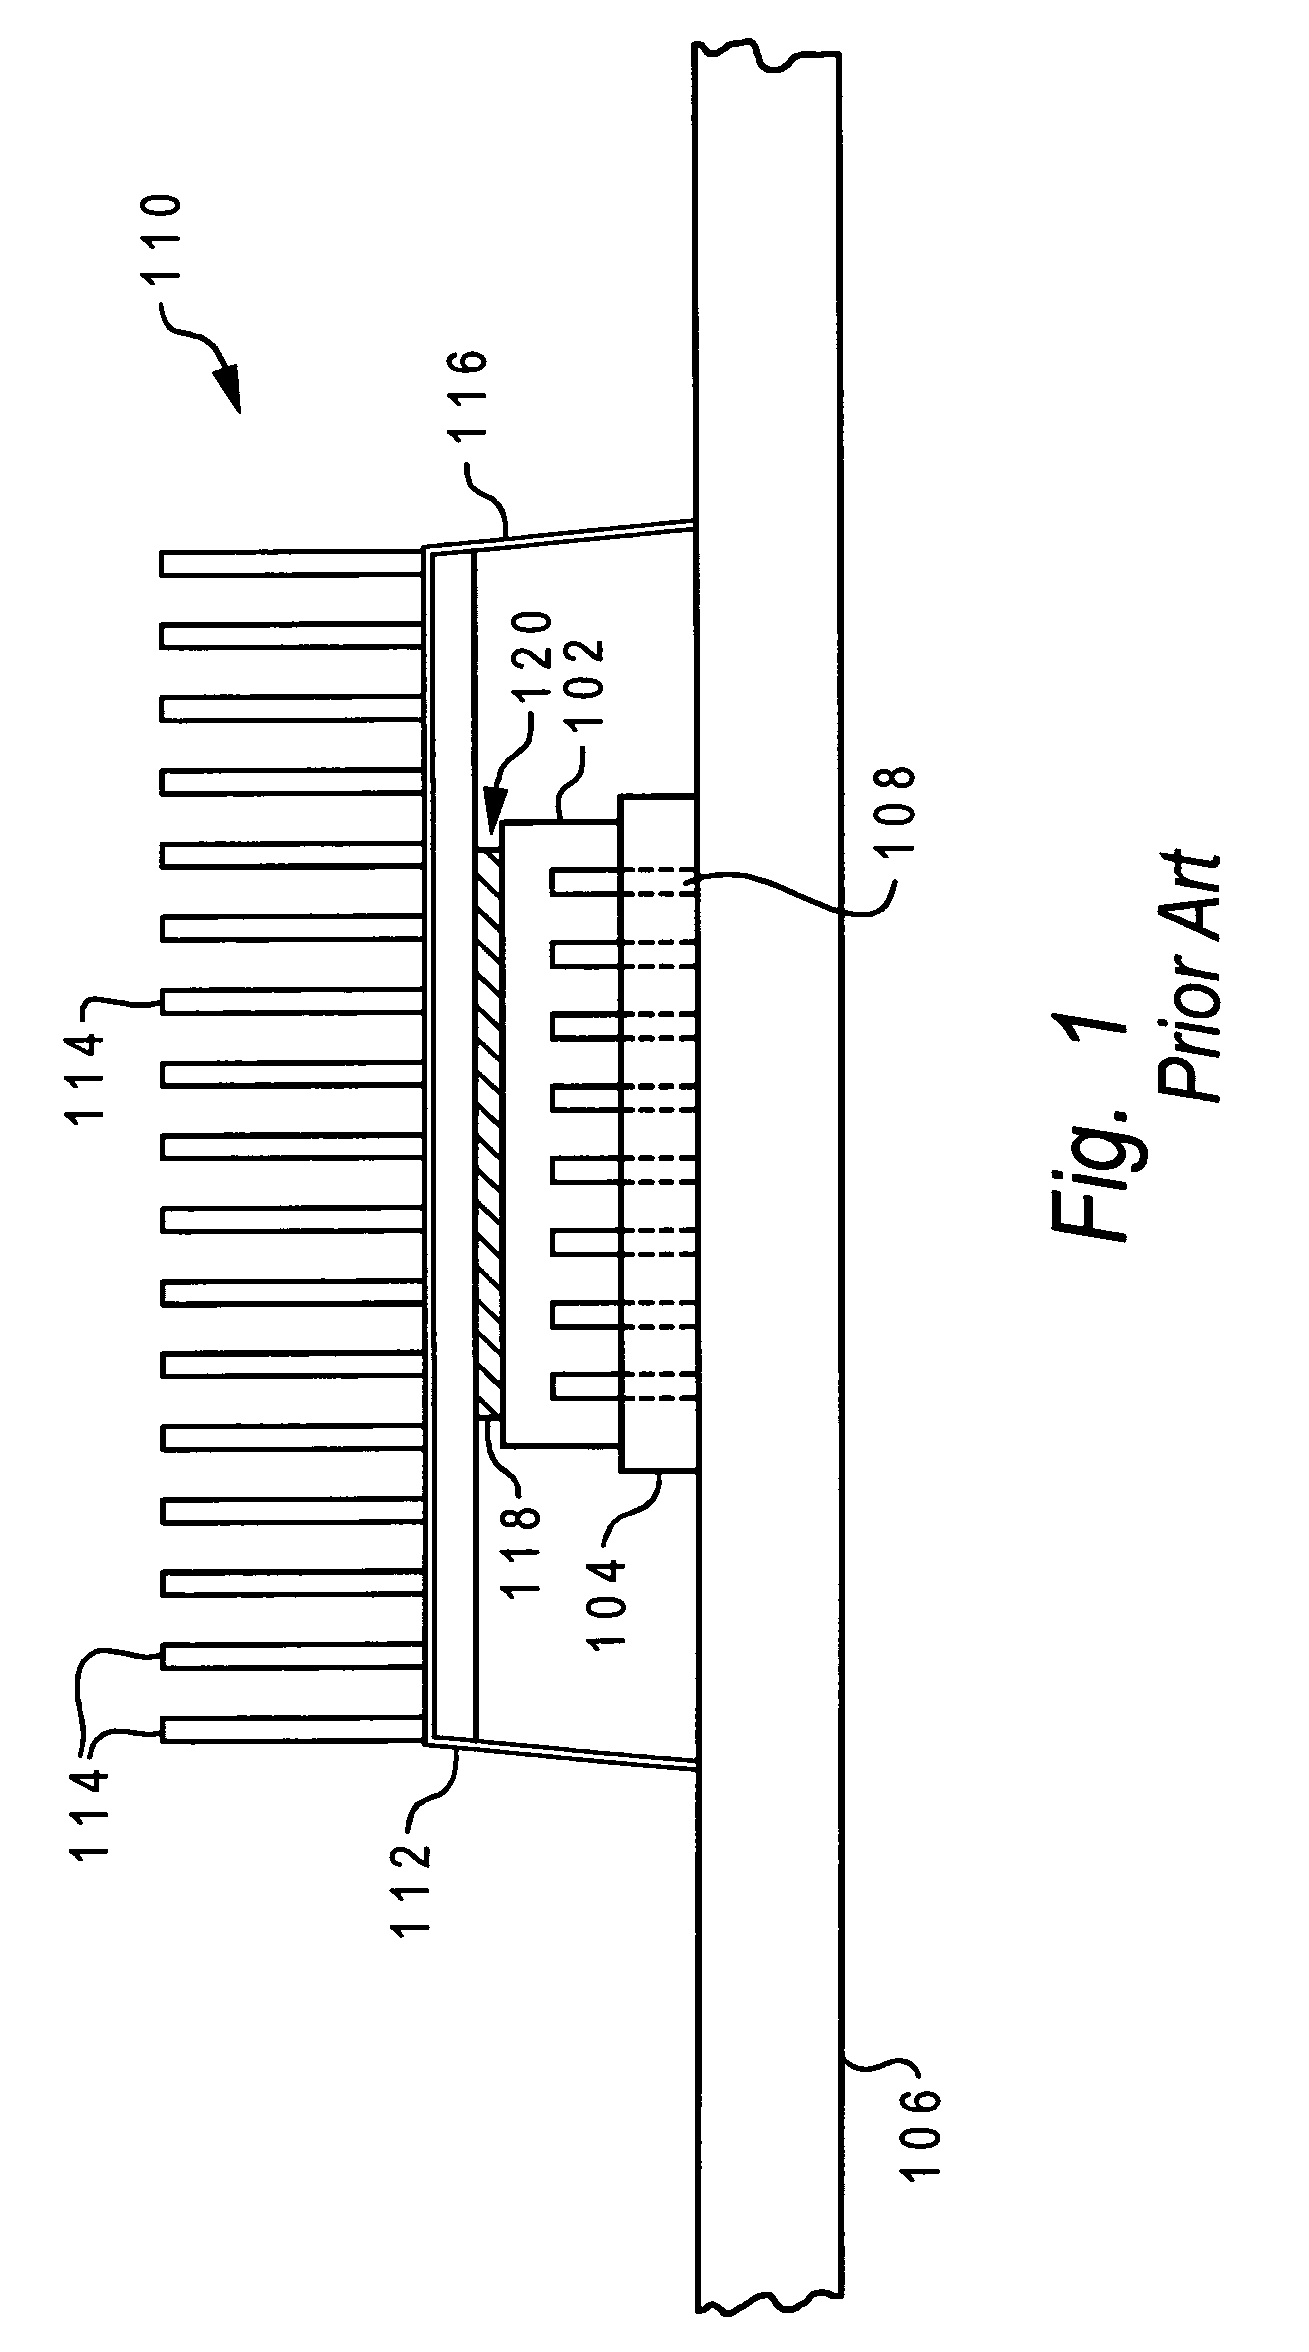 Heat sink and chip sandwich system